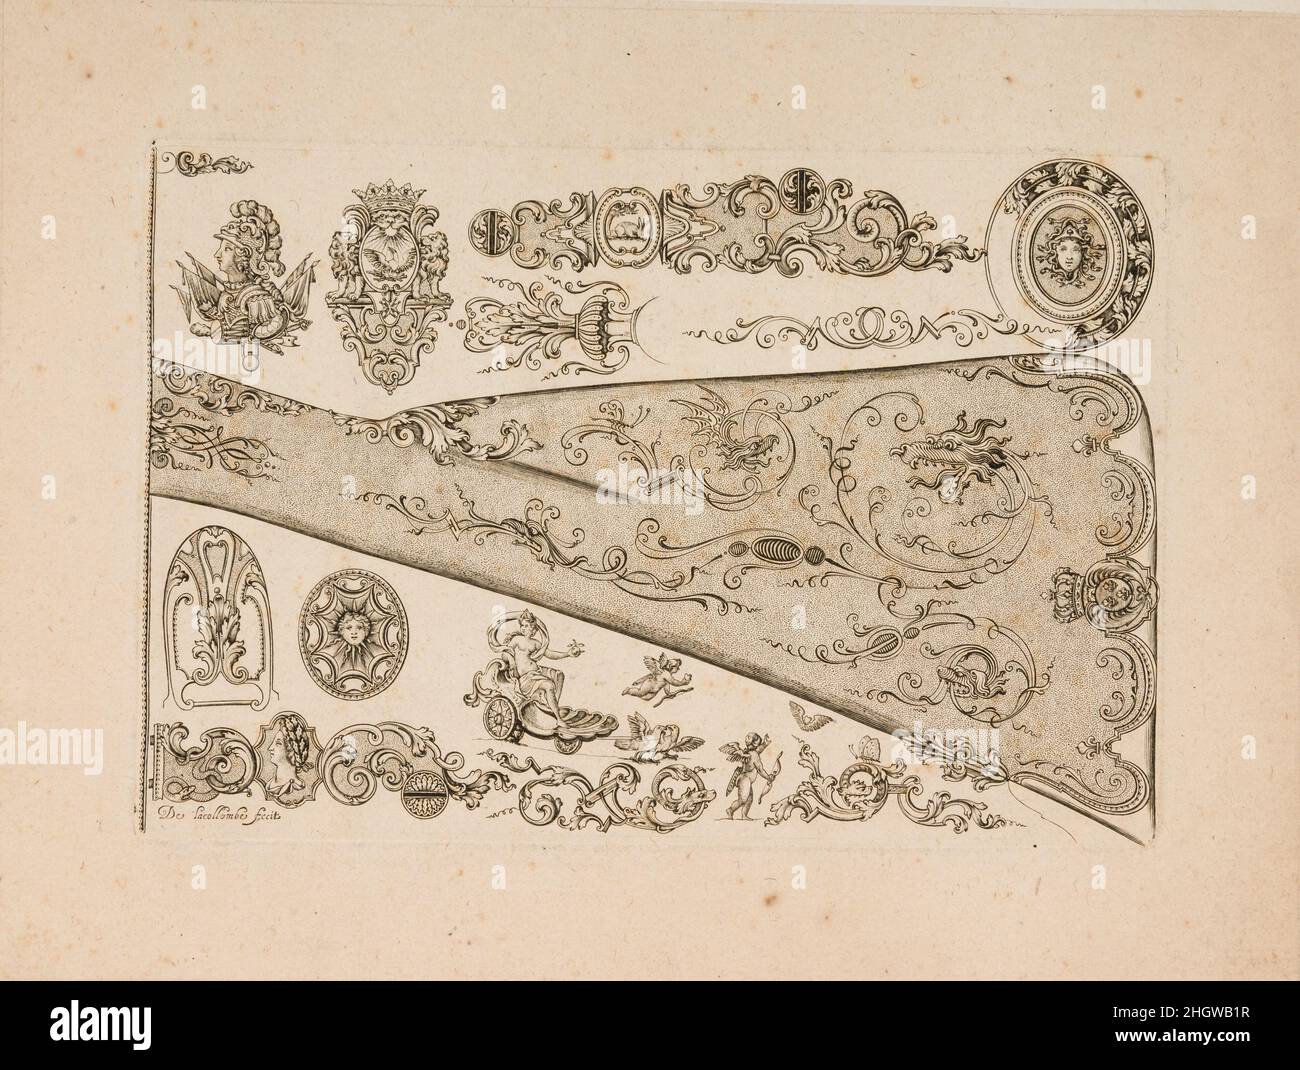 Plate Seven from Nouveavx Desseins D'Arquebvseries ca. 1730 De Lacollombe This print is a prime example of French designs for the decoration of firearms in the late rococo style, which set the fashion for luxury arms across Europe at the time. It was created by an enigmatic engraver known only as De Lacollombe and comes from a series of prints that was added to after his death and then published by his better-known pupil Gilles Demarteau (1722–1776) in about 1749. Individual motifs taken from them can be seen on guns made throughout the eighteenth century in France, Germany, the Netherlands, I Stock Photo